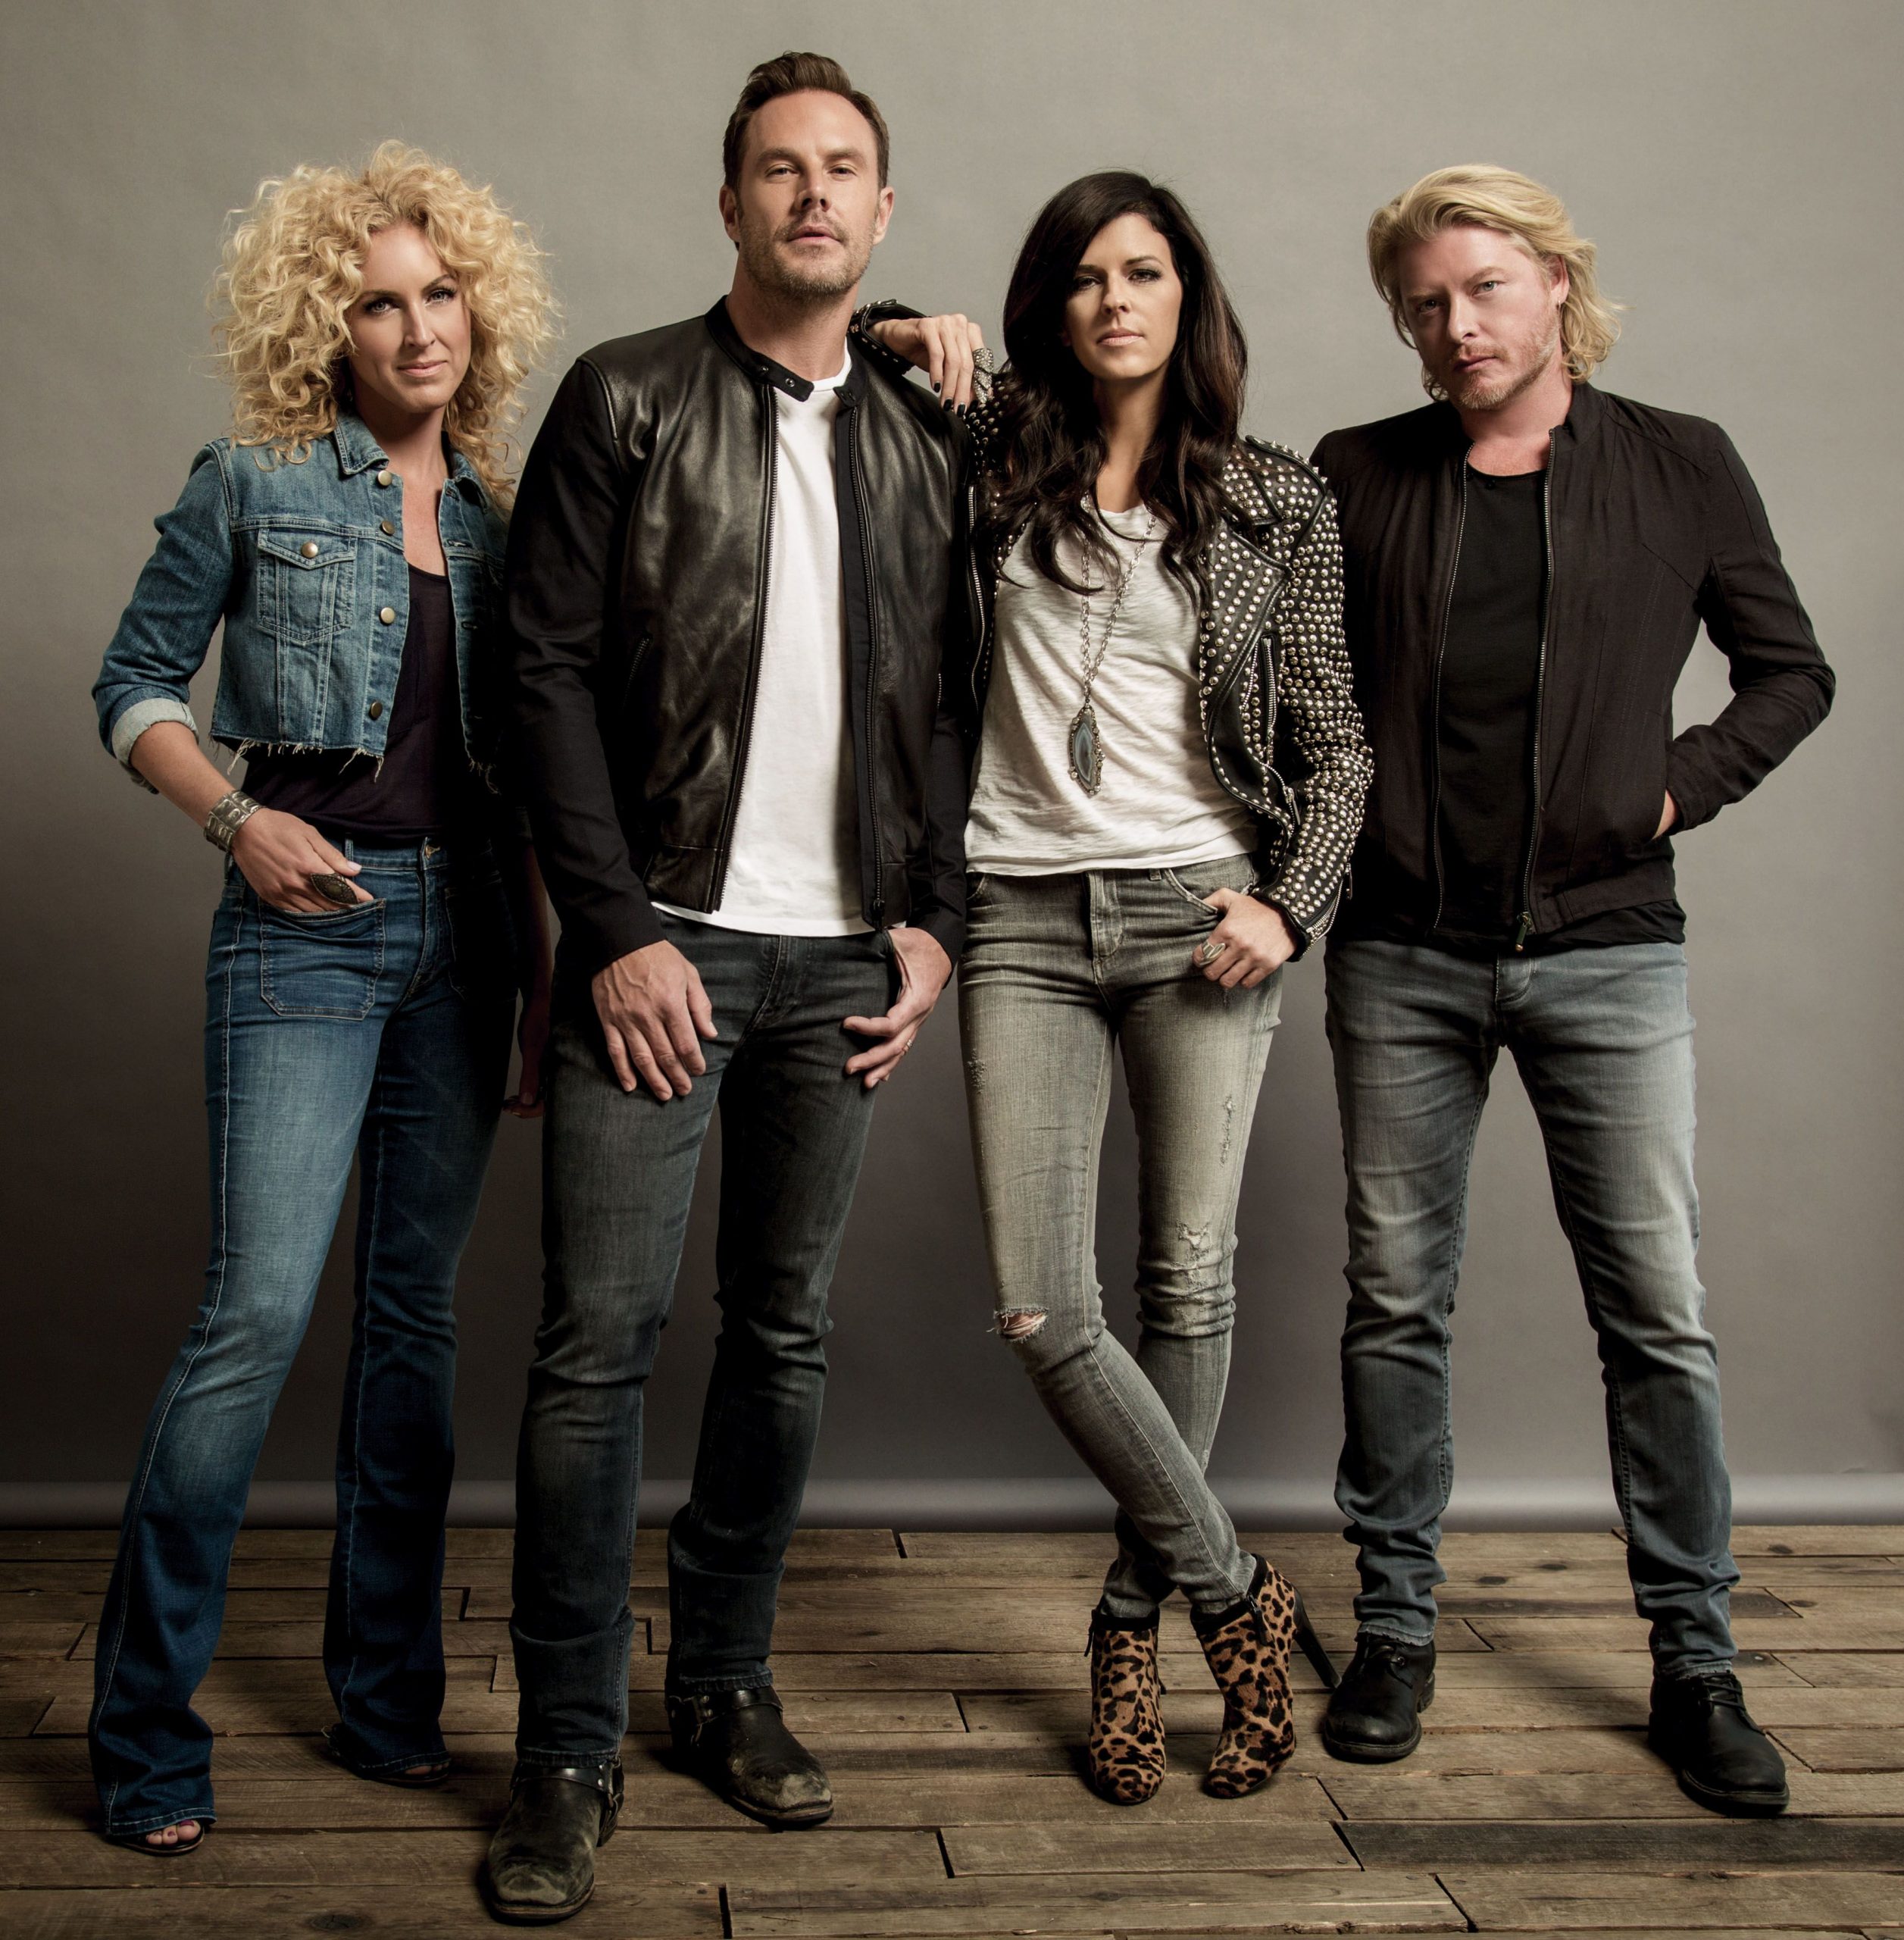 LITTLE BIG TOWN MAKES BILLBOARD HISTORY WITH LATEST SINGLE “GIRL CRUSH”